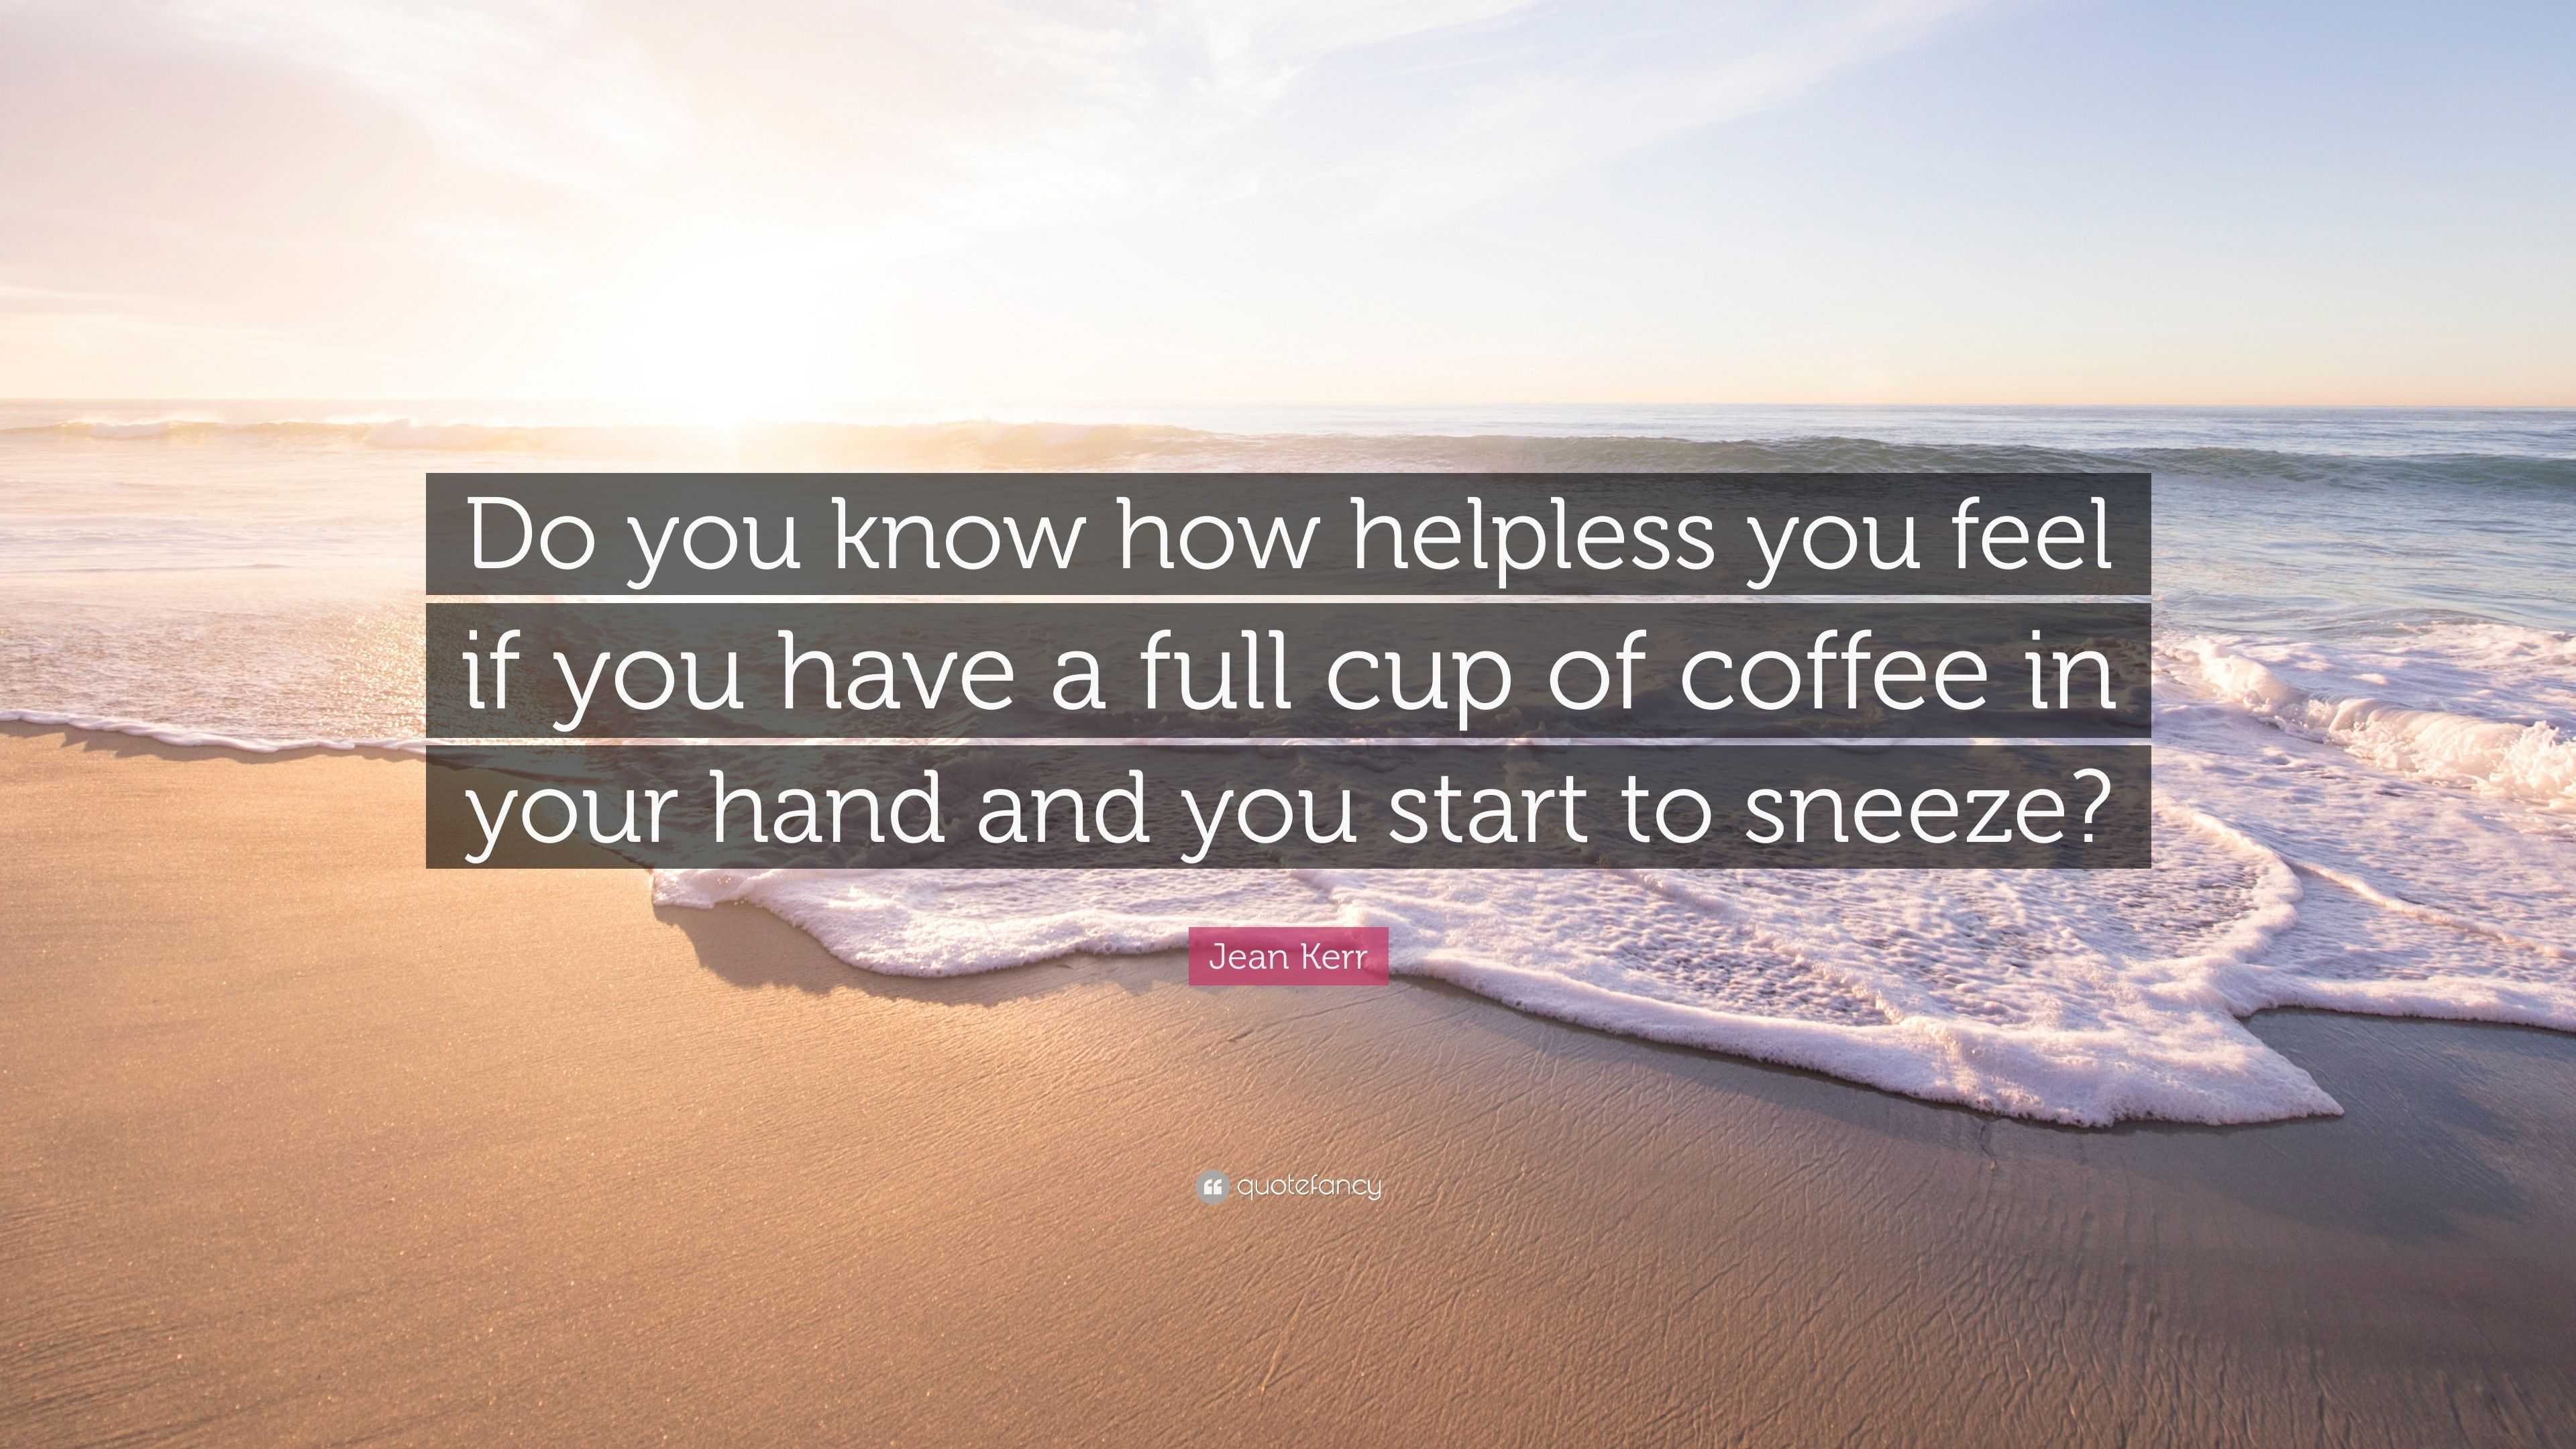 Jean Kerr Quote: “Do you know how helpless you feel if you have a